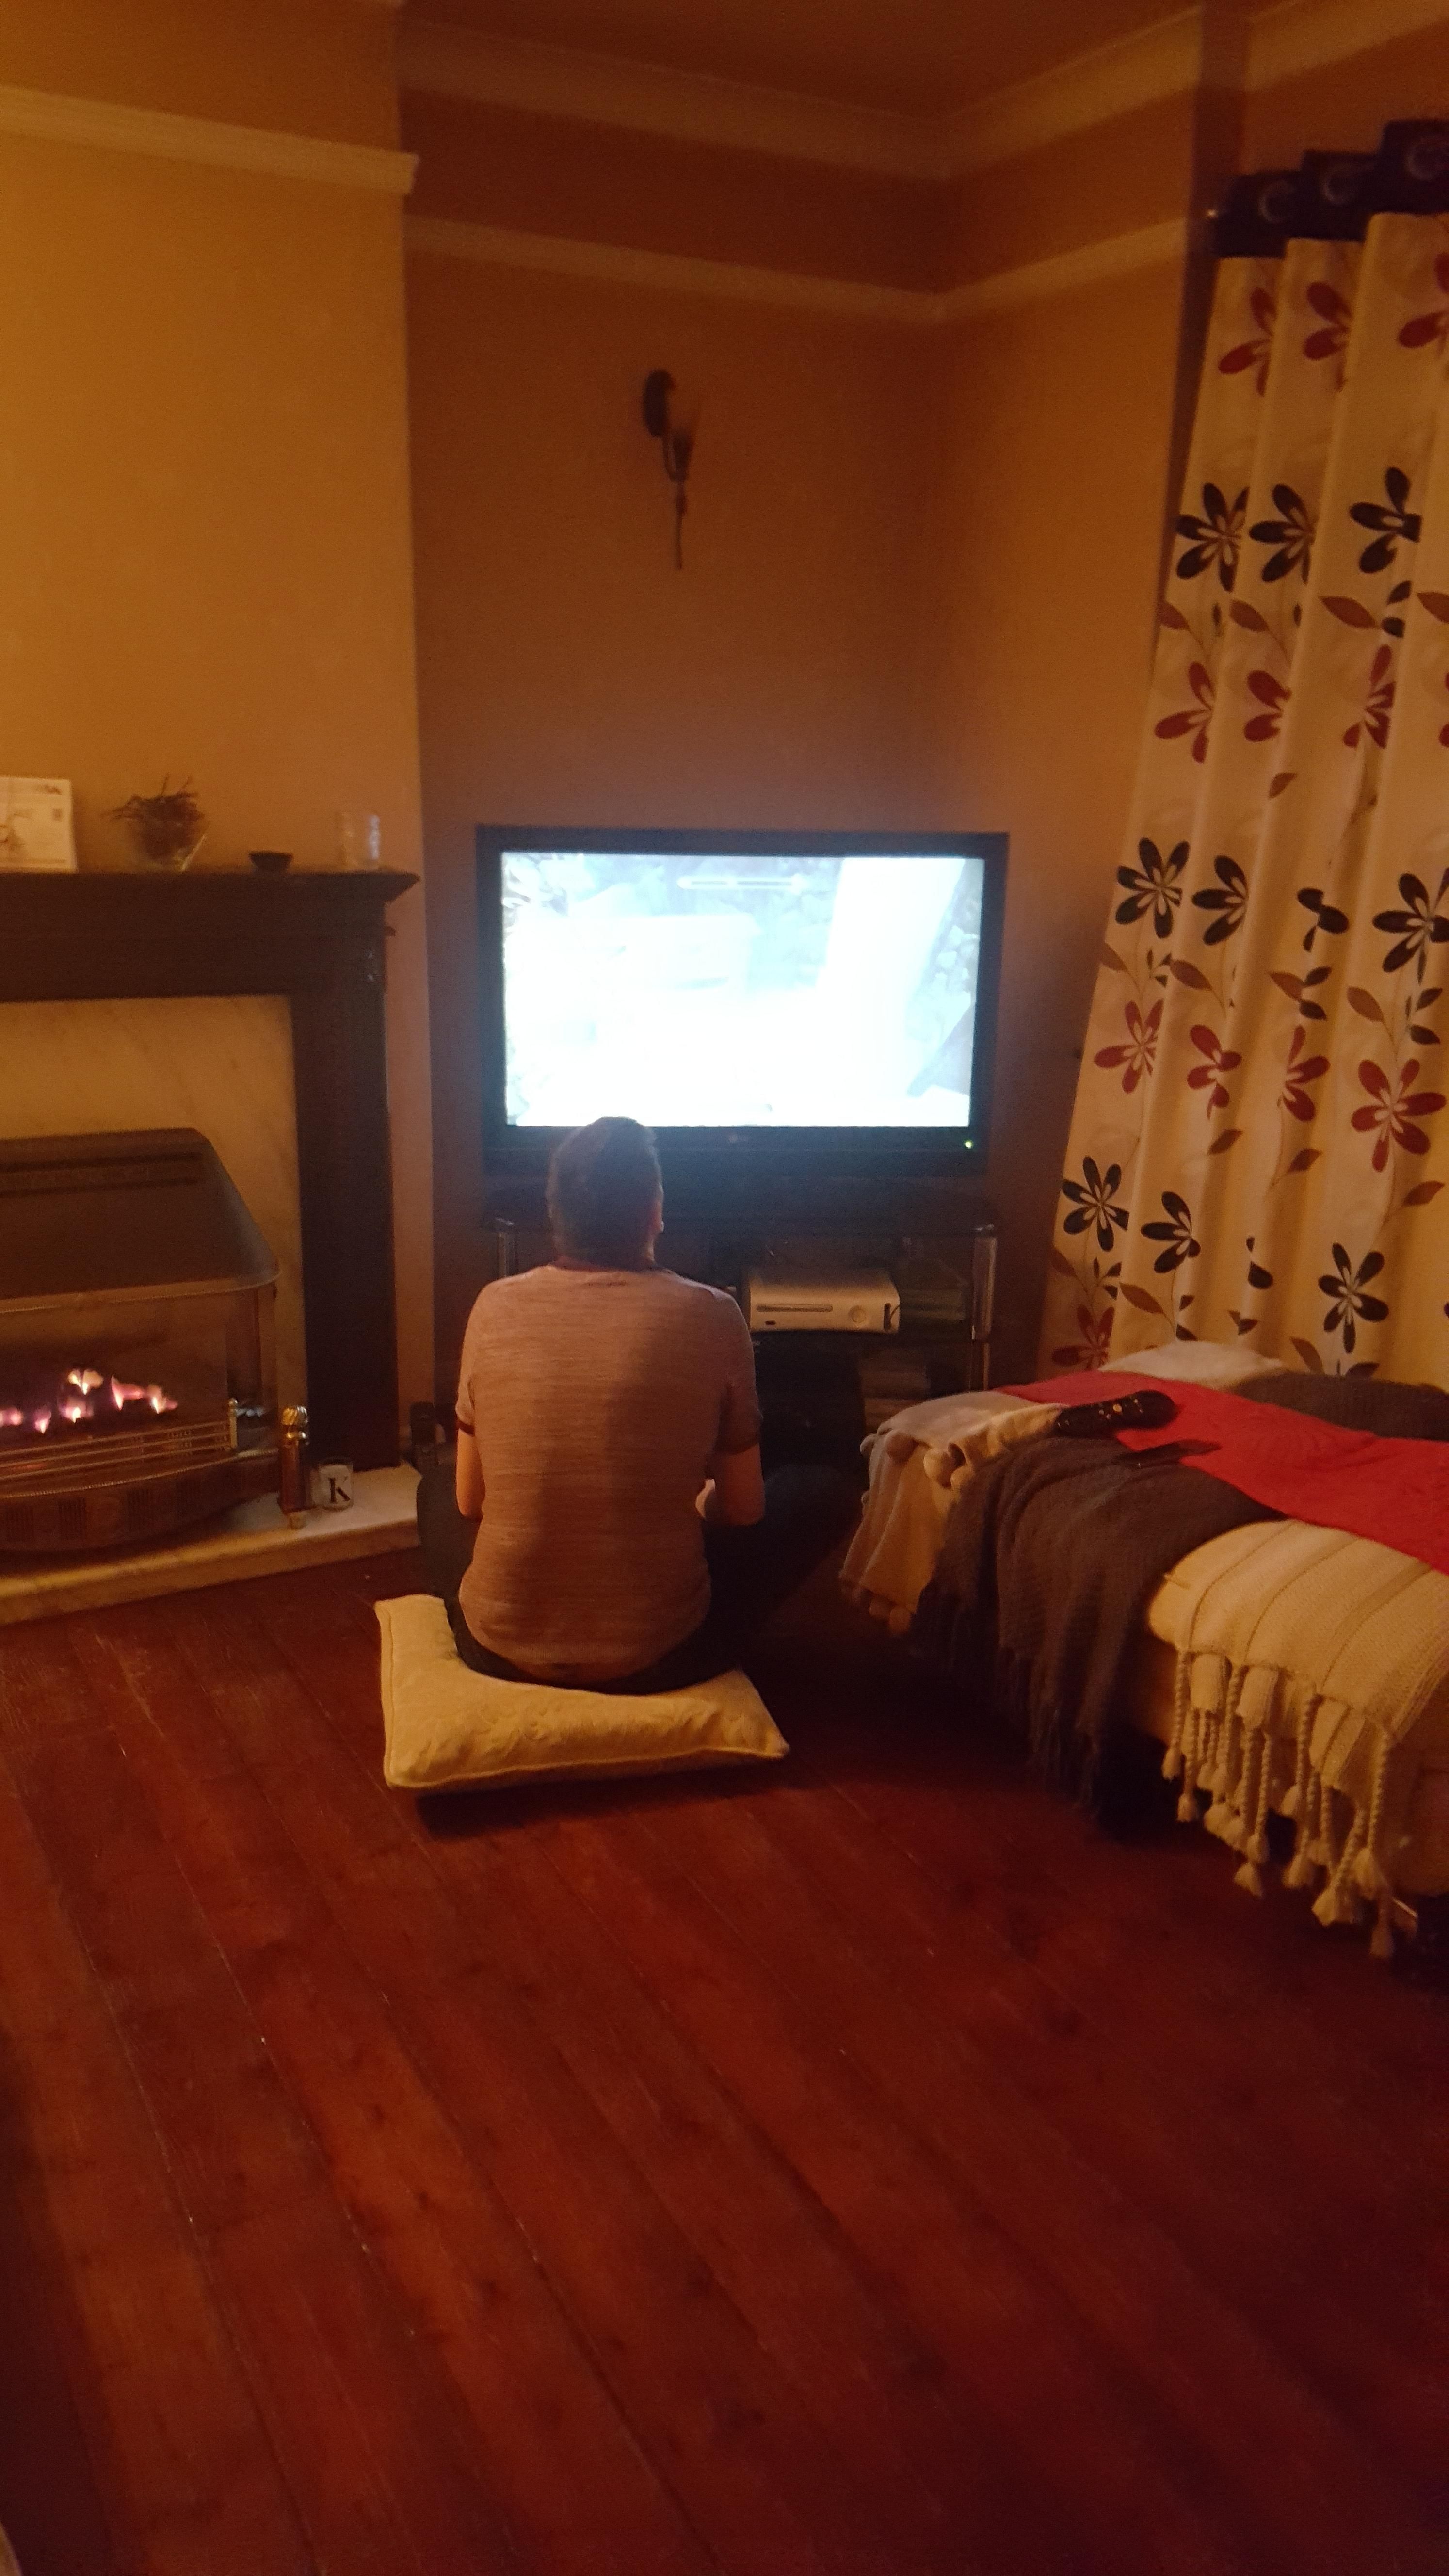 My dad just got a PS4. Came back to find my dad had regressed into a child..